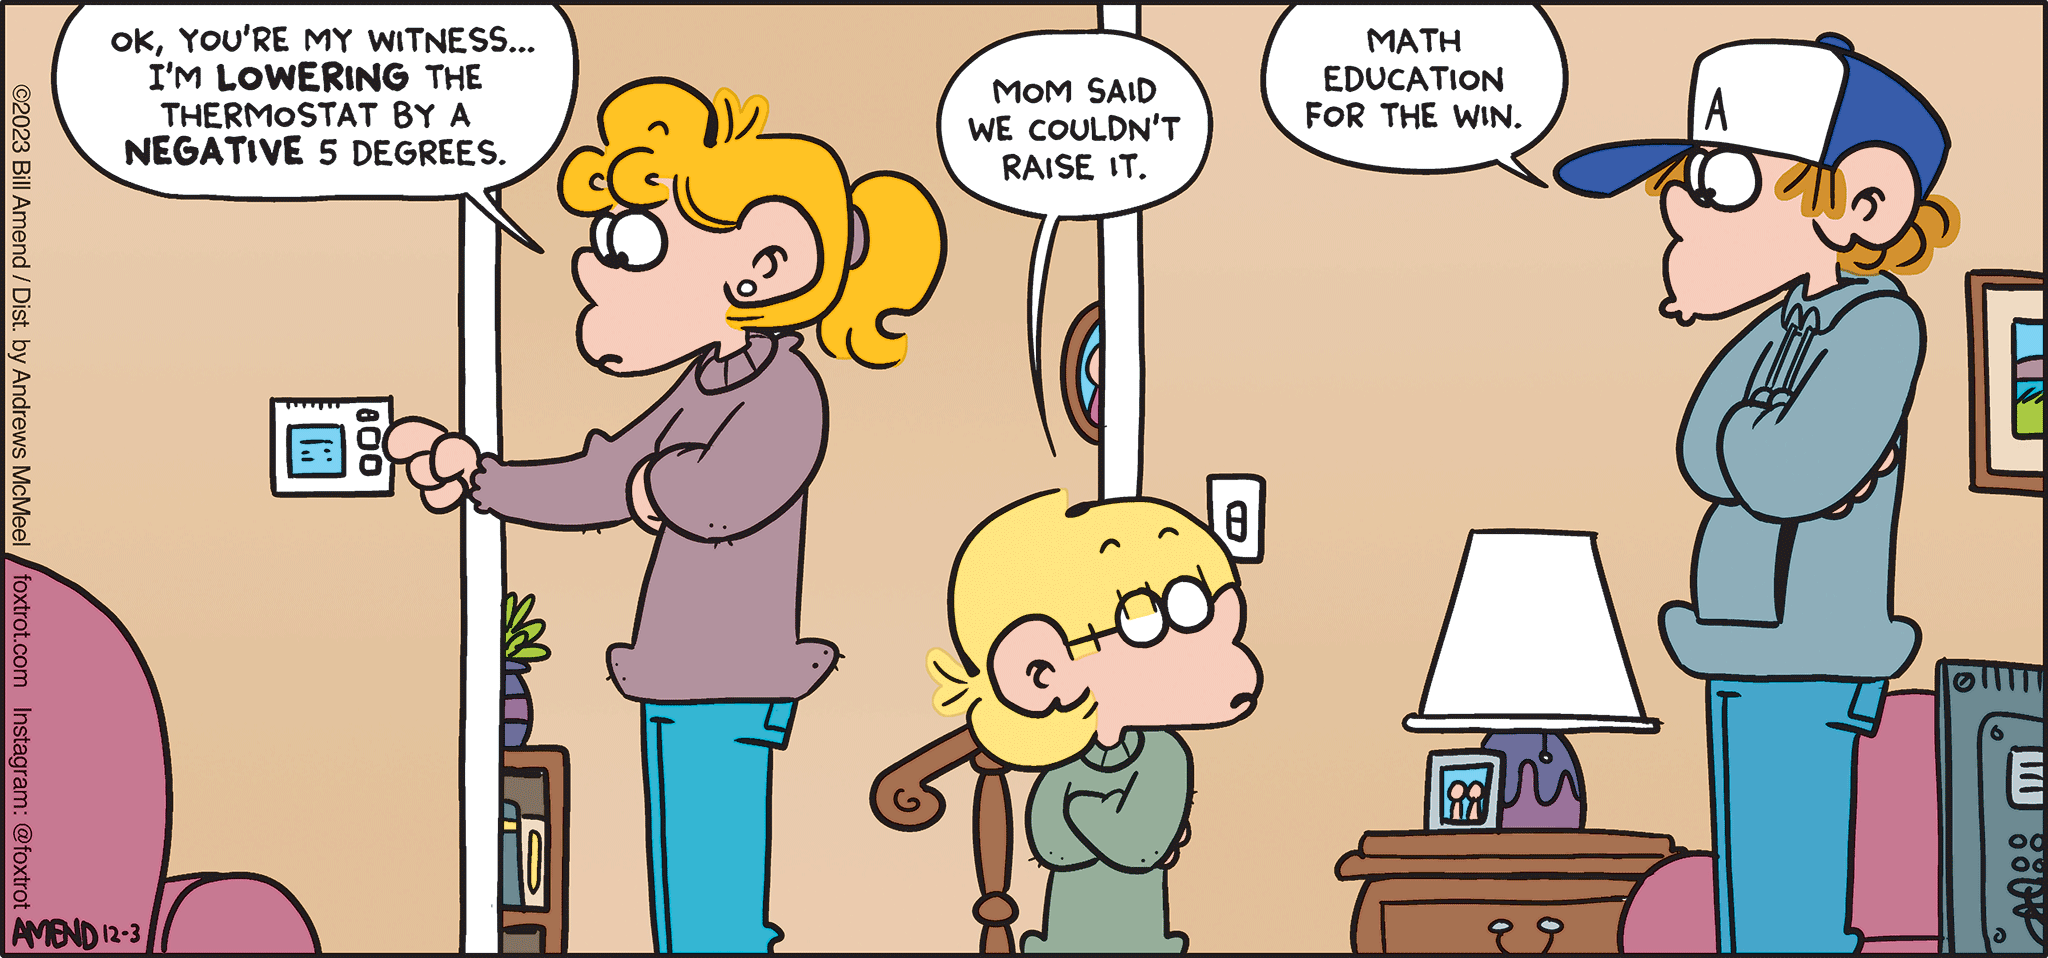 FoxTrot comic strip by Bill Amend - "Negative Temps" published December 3, 2023 - Transcript: Paige Fox: Ok, you're my witness... I'm LOWERING the thermostat by a NEGATIVE 5 degrees. Jason Fox: Mom said we couldn't raise it. Peter Fox: Math education for the win.